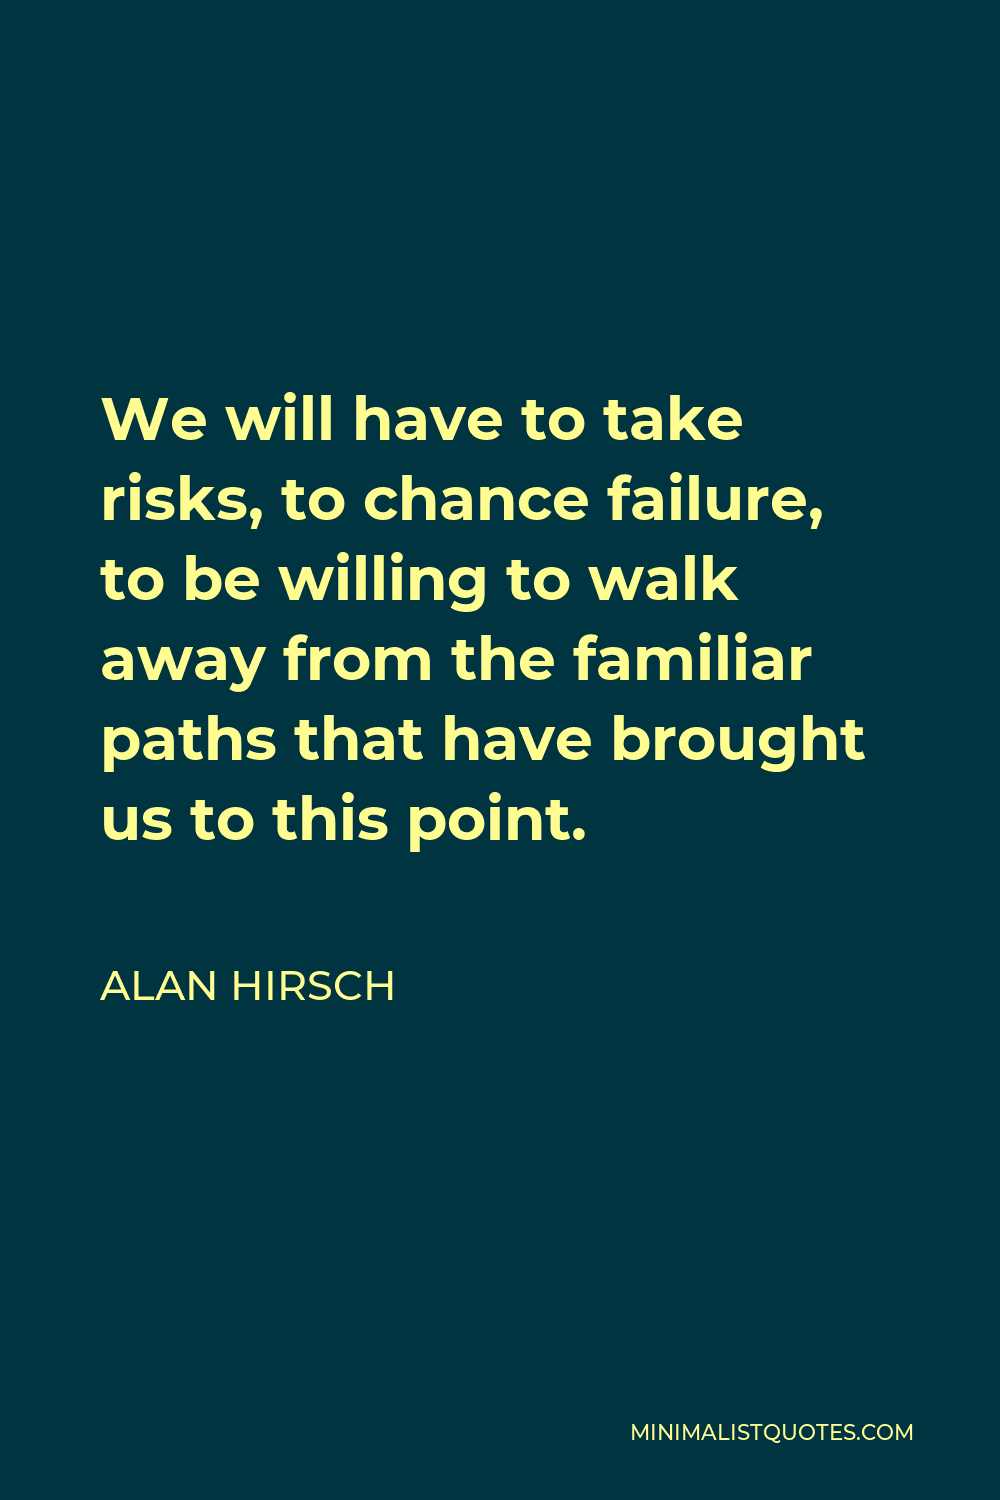 Alan Hirsch Quote - We will have to take risks, to chance failure, to be willing to walk away from the familiar paths that have brought us to this point.